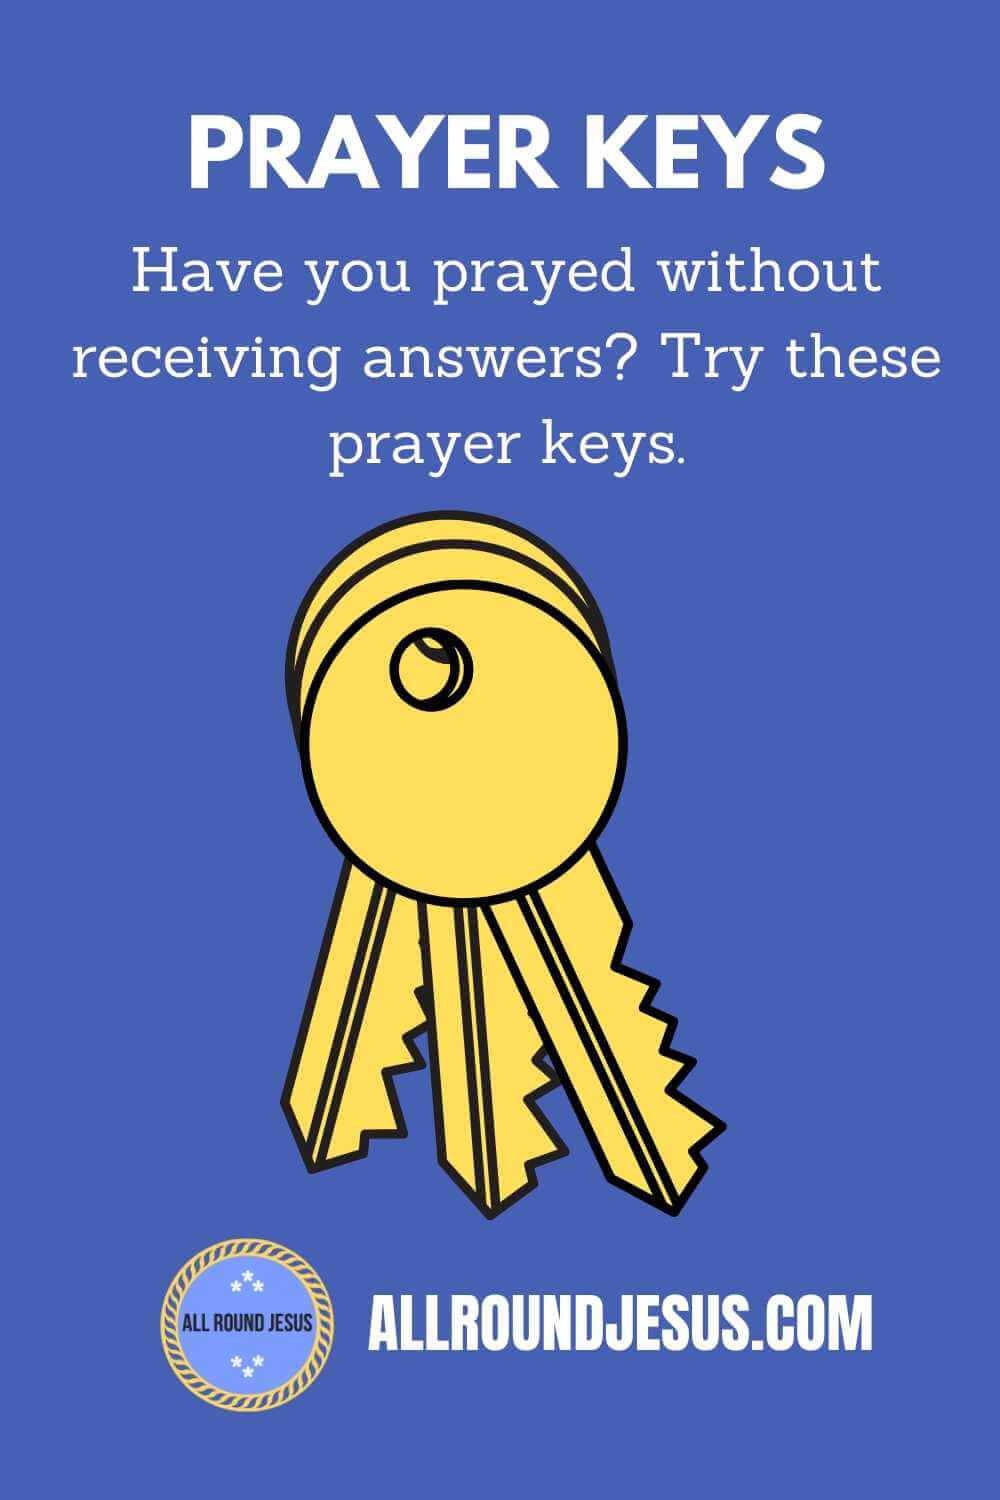 what to do when you pray without receiving answers